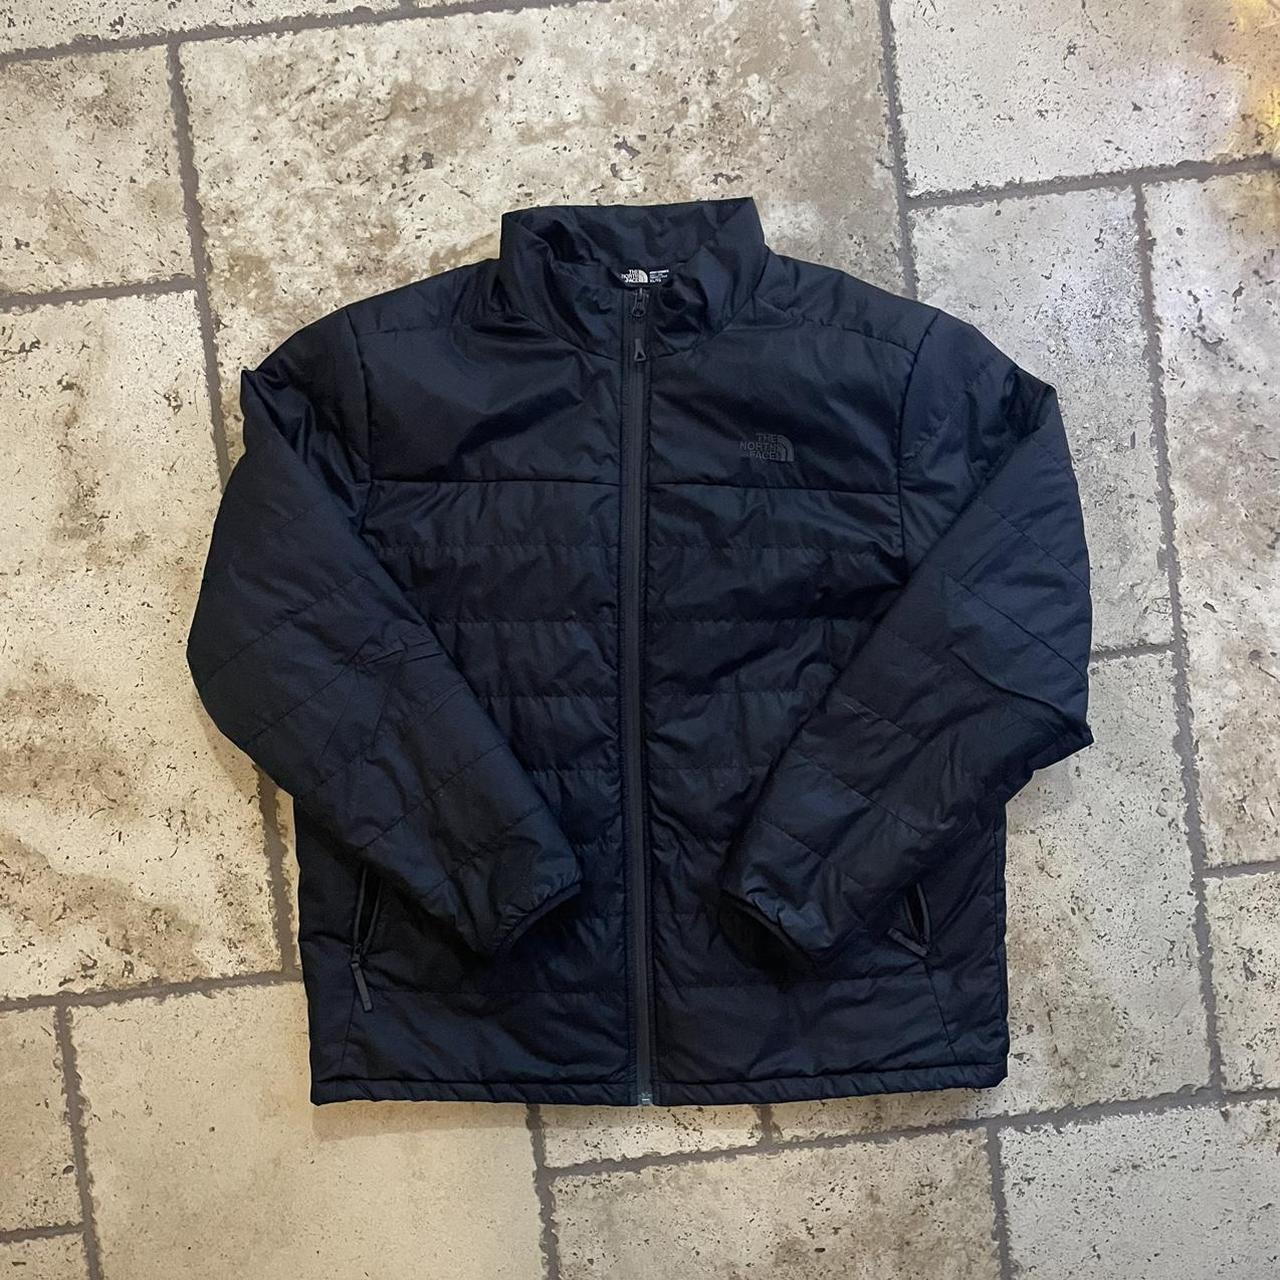 Black The North Face Puffer Jacket Dm me if you want... - Depop